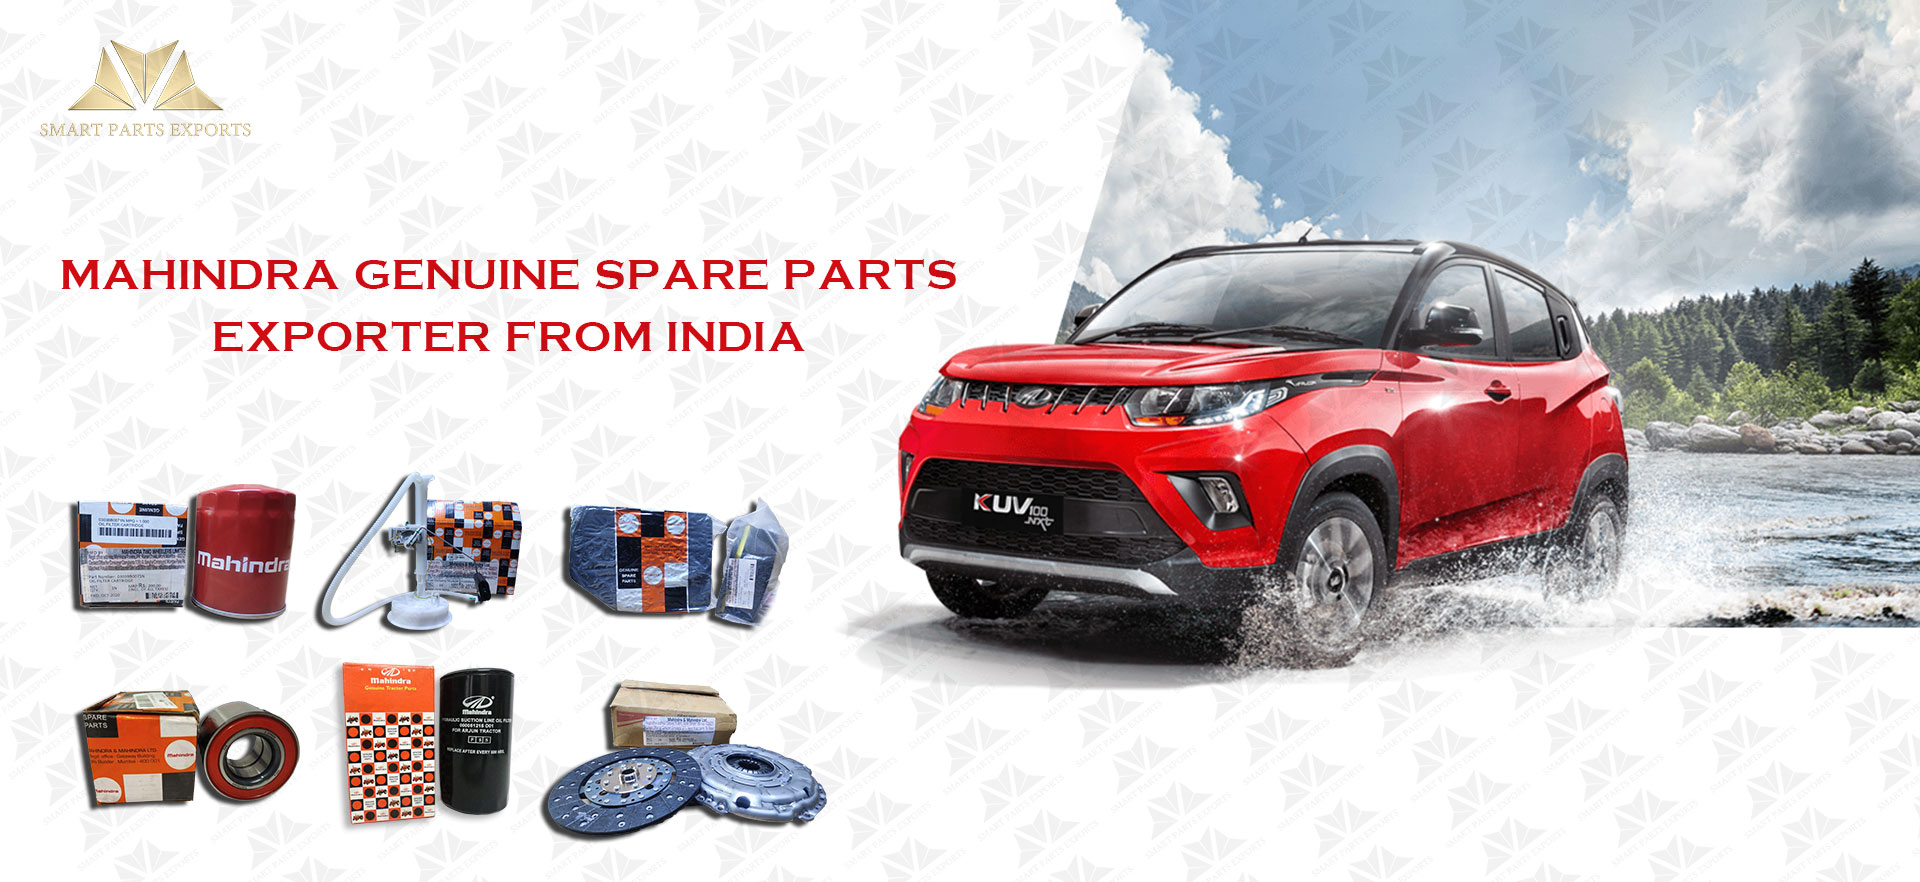 Mahindra Genuine Spare Parts Exporter from India